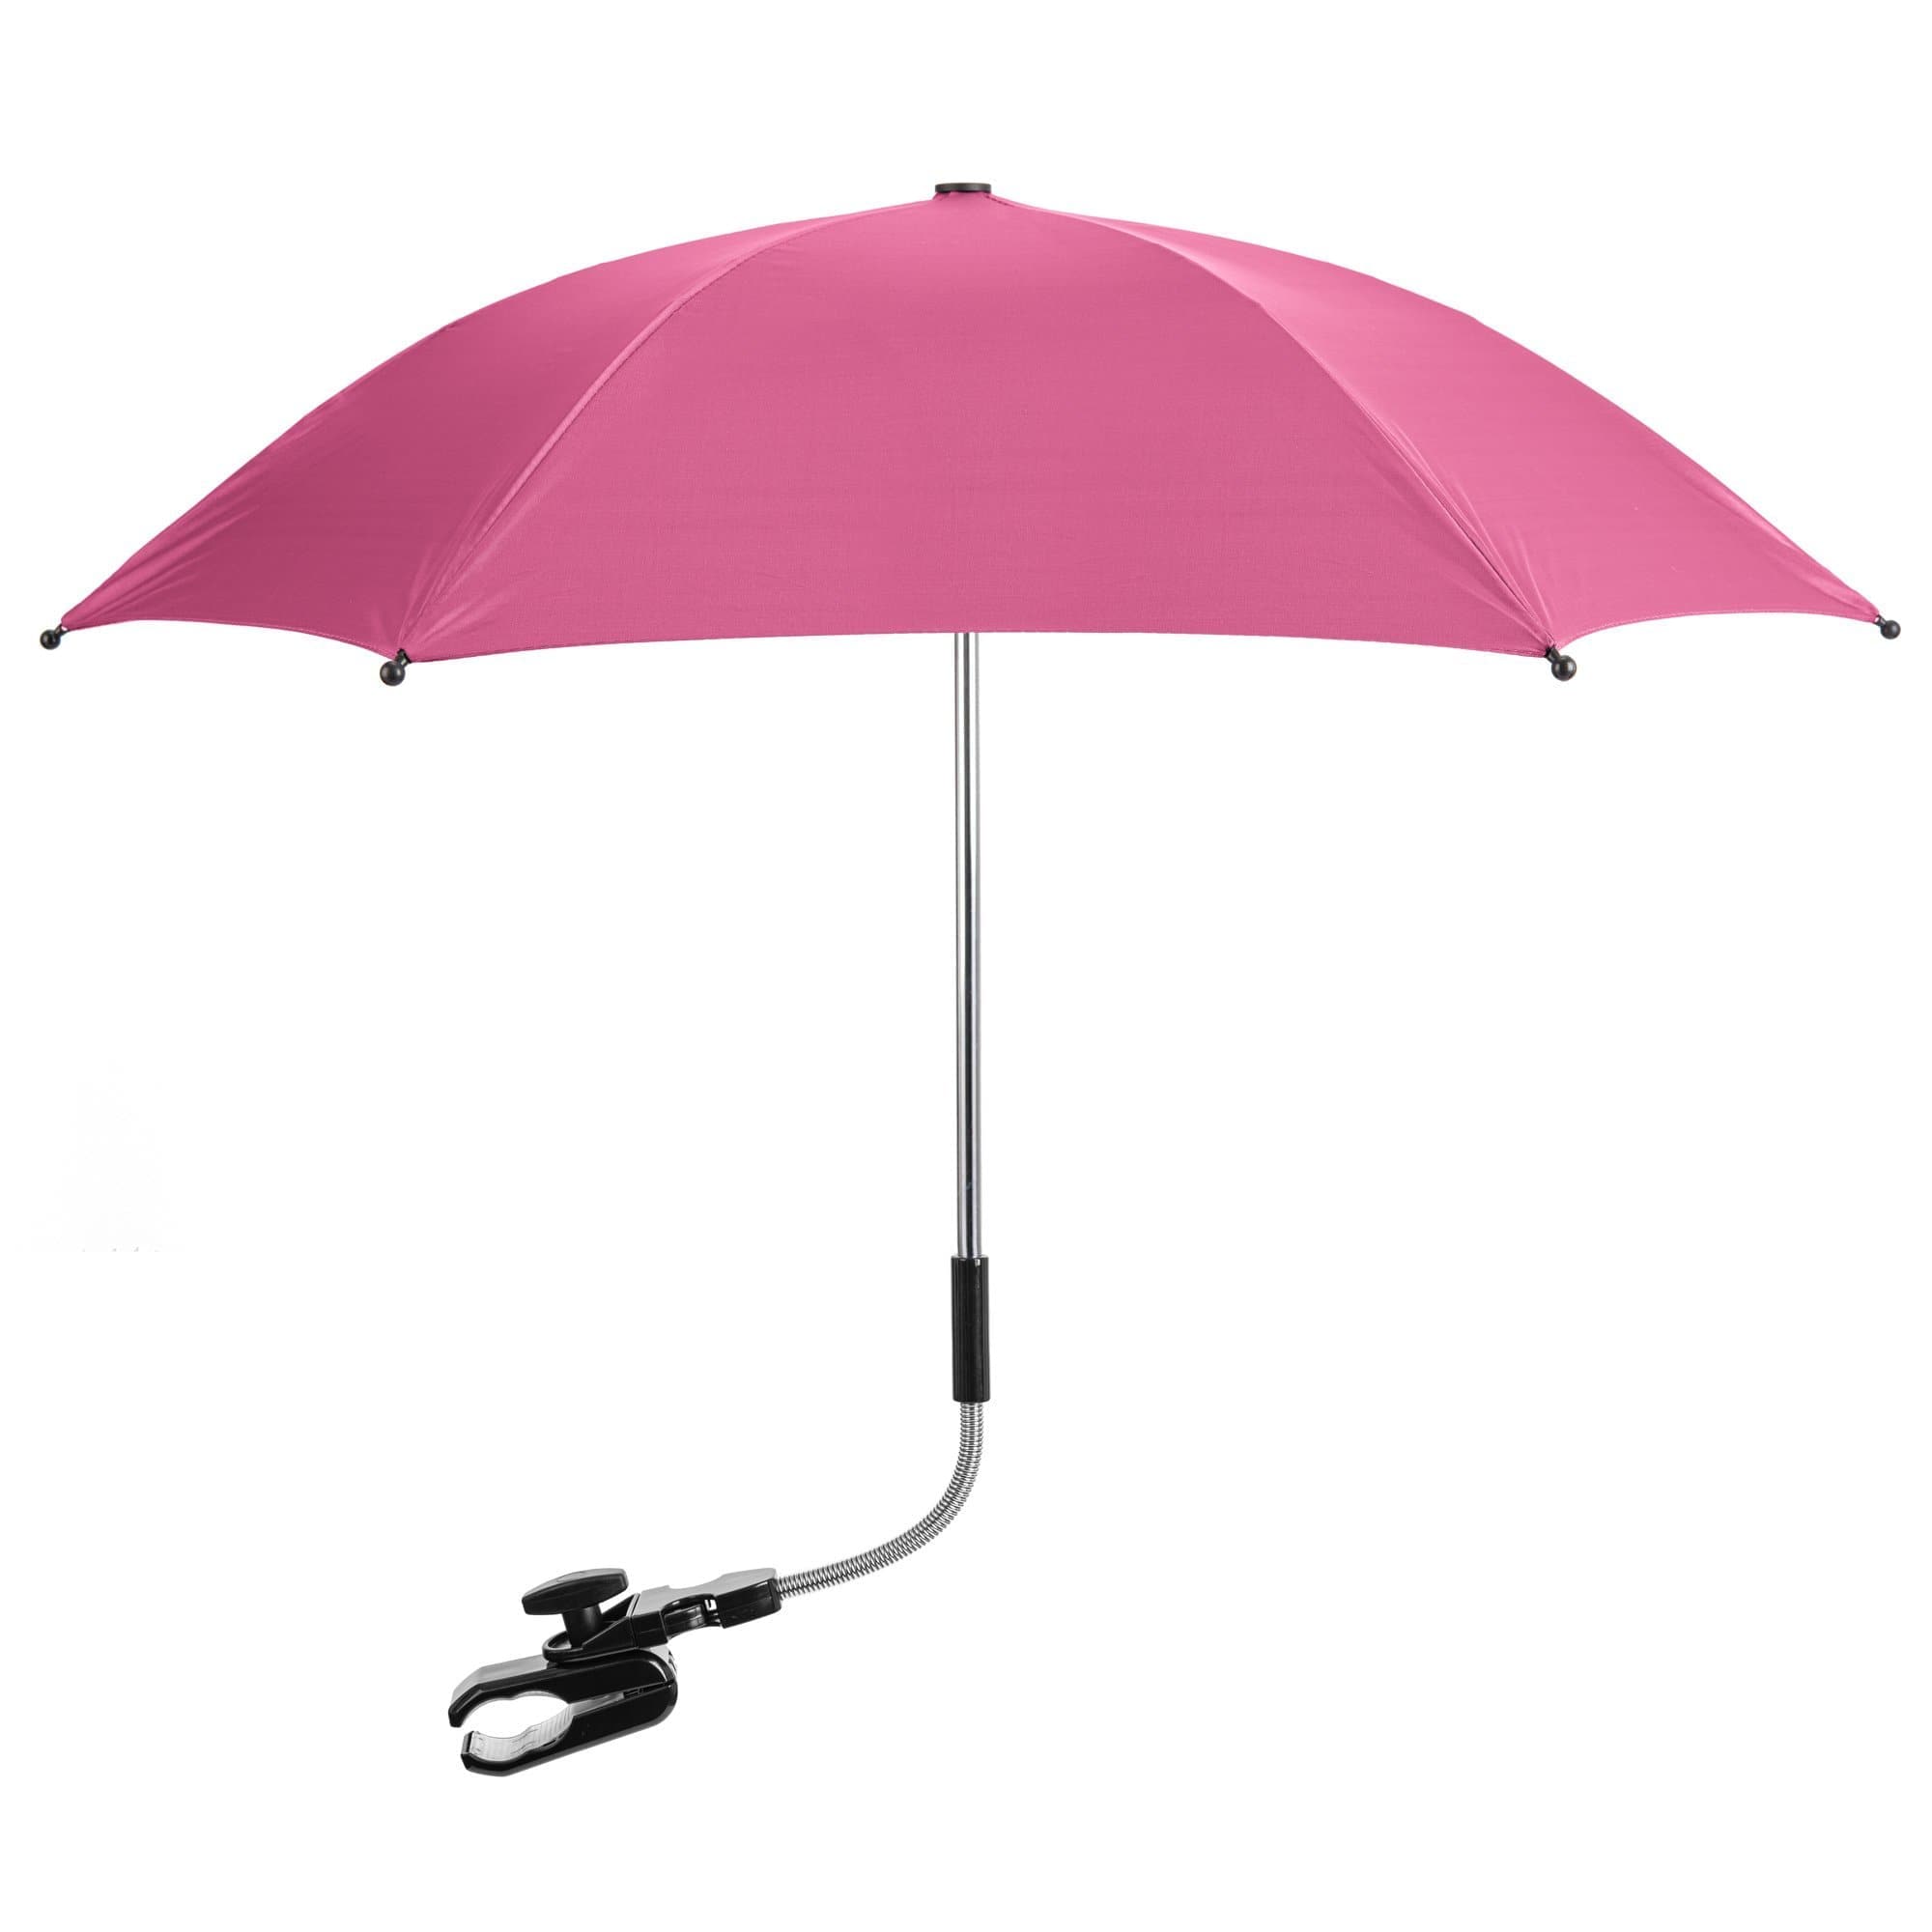 Baby Parasol Compatible With Babylo - Fits All Models - For Your Little One